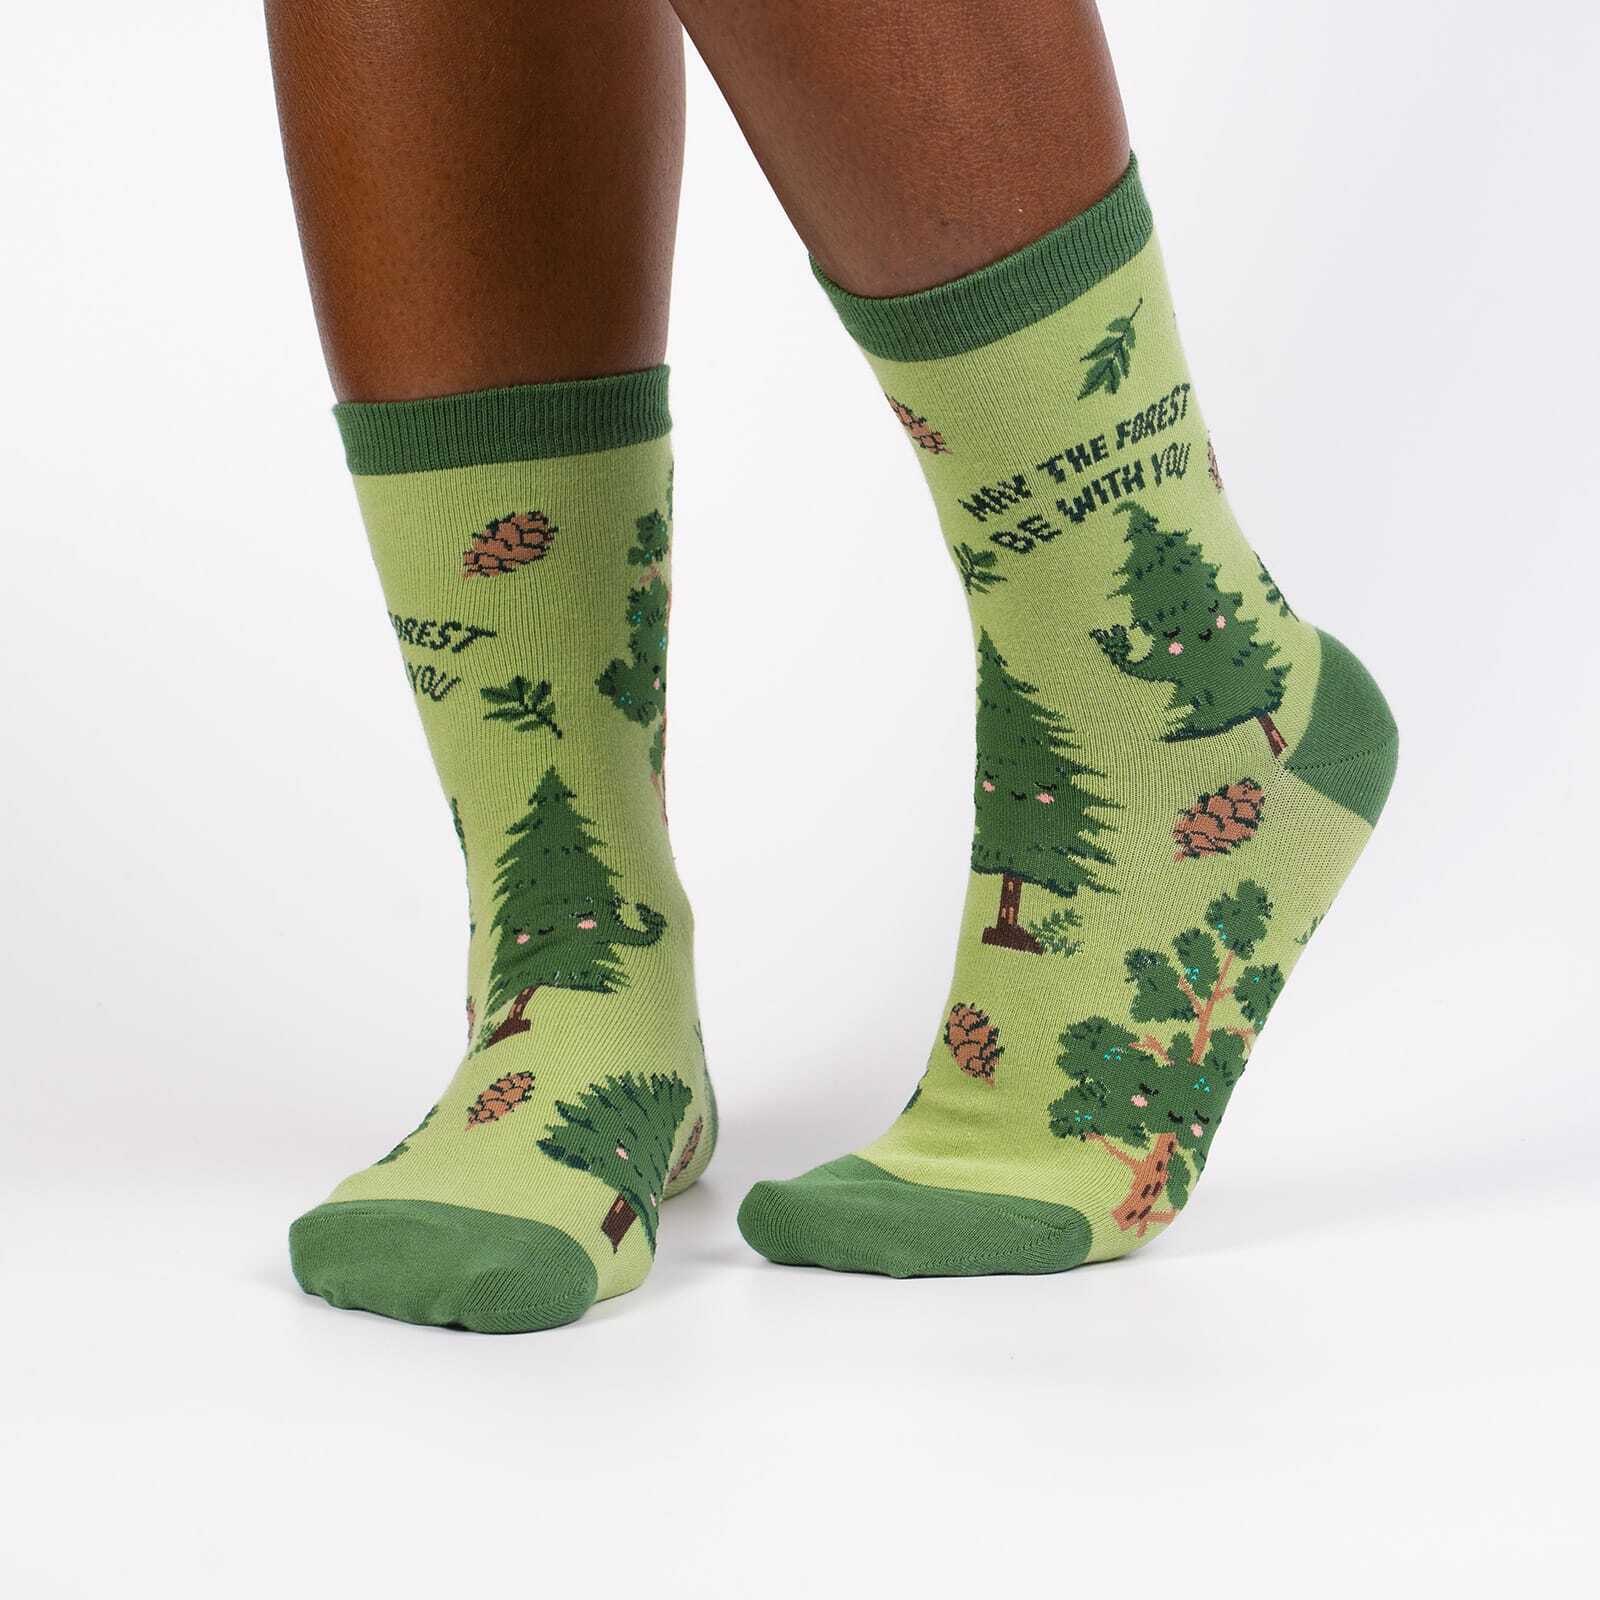 Sock It To Me May the Forest Be With You women's crew sock featuring a green sock with trees and pinecones and "May the forest be with you" written. Socks worn by model seen from the side. 